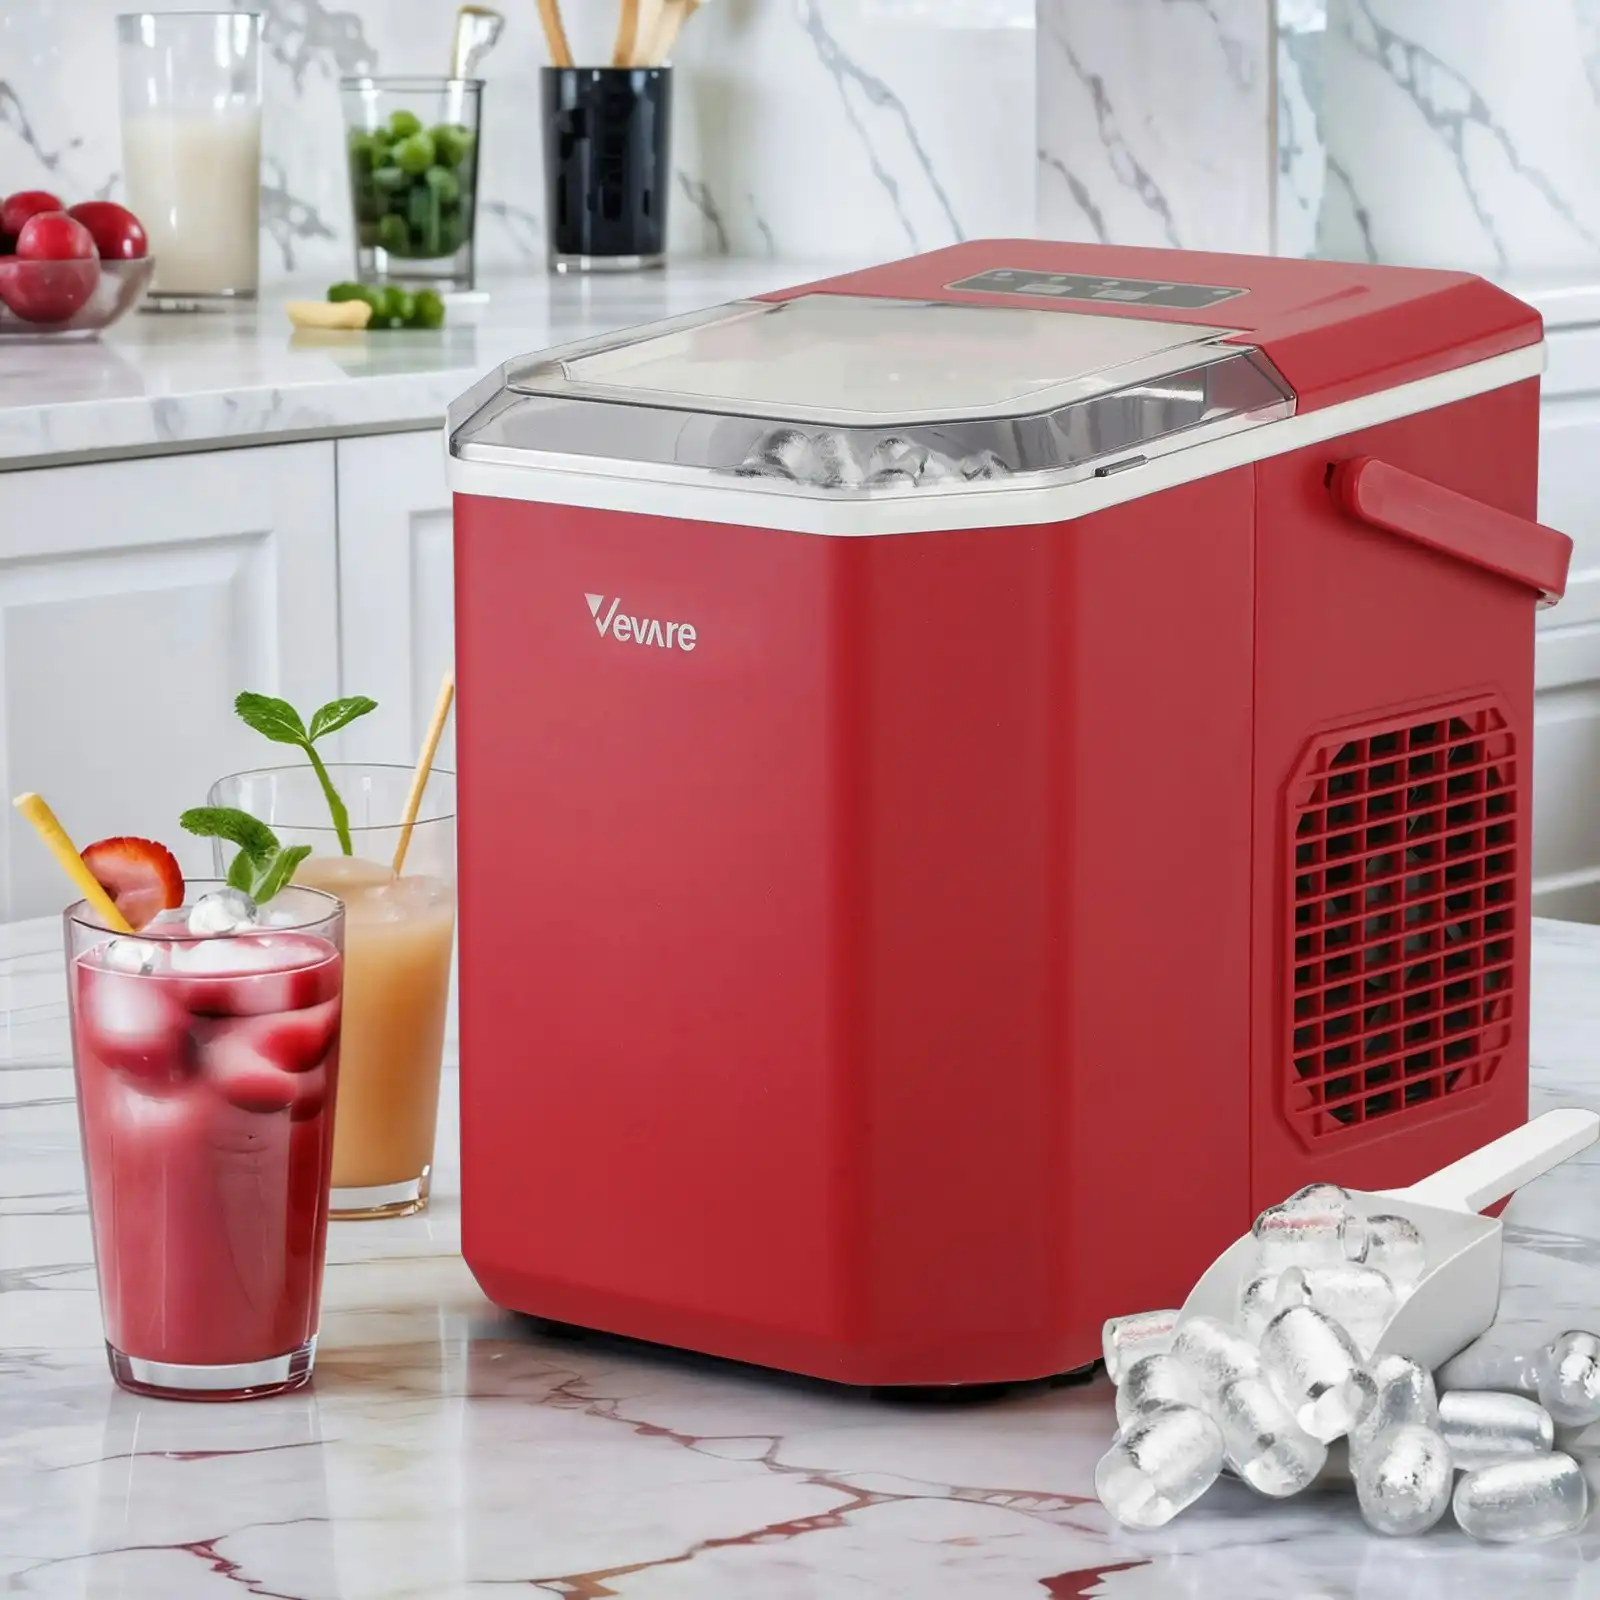 Vevare Portable Ice Maker Machine With Handle Red